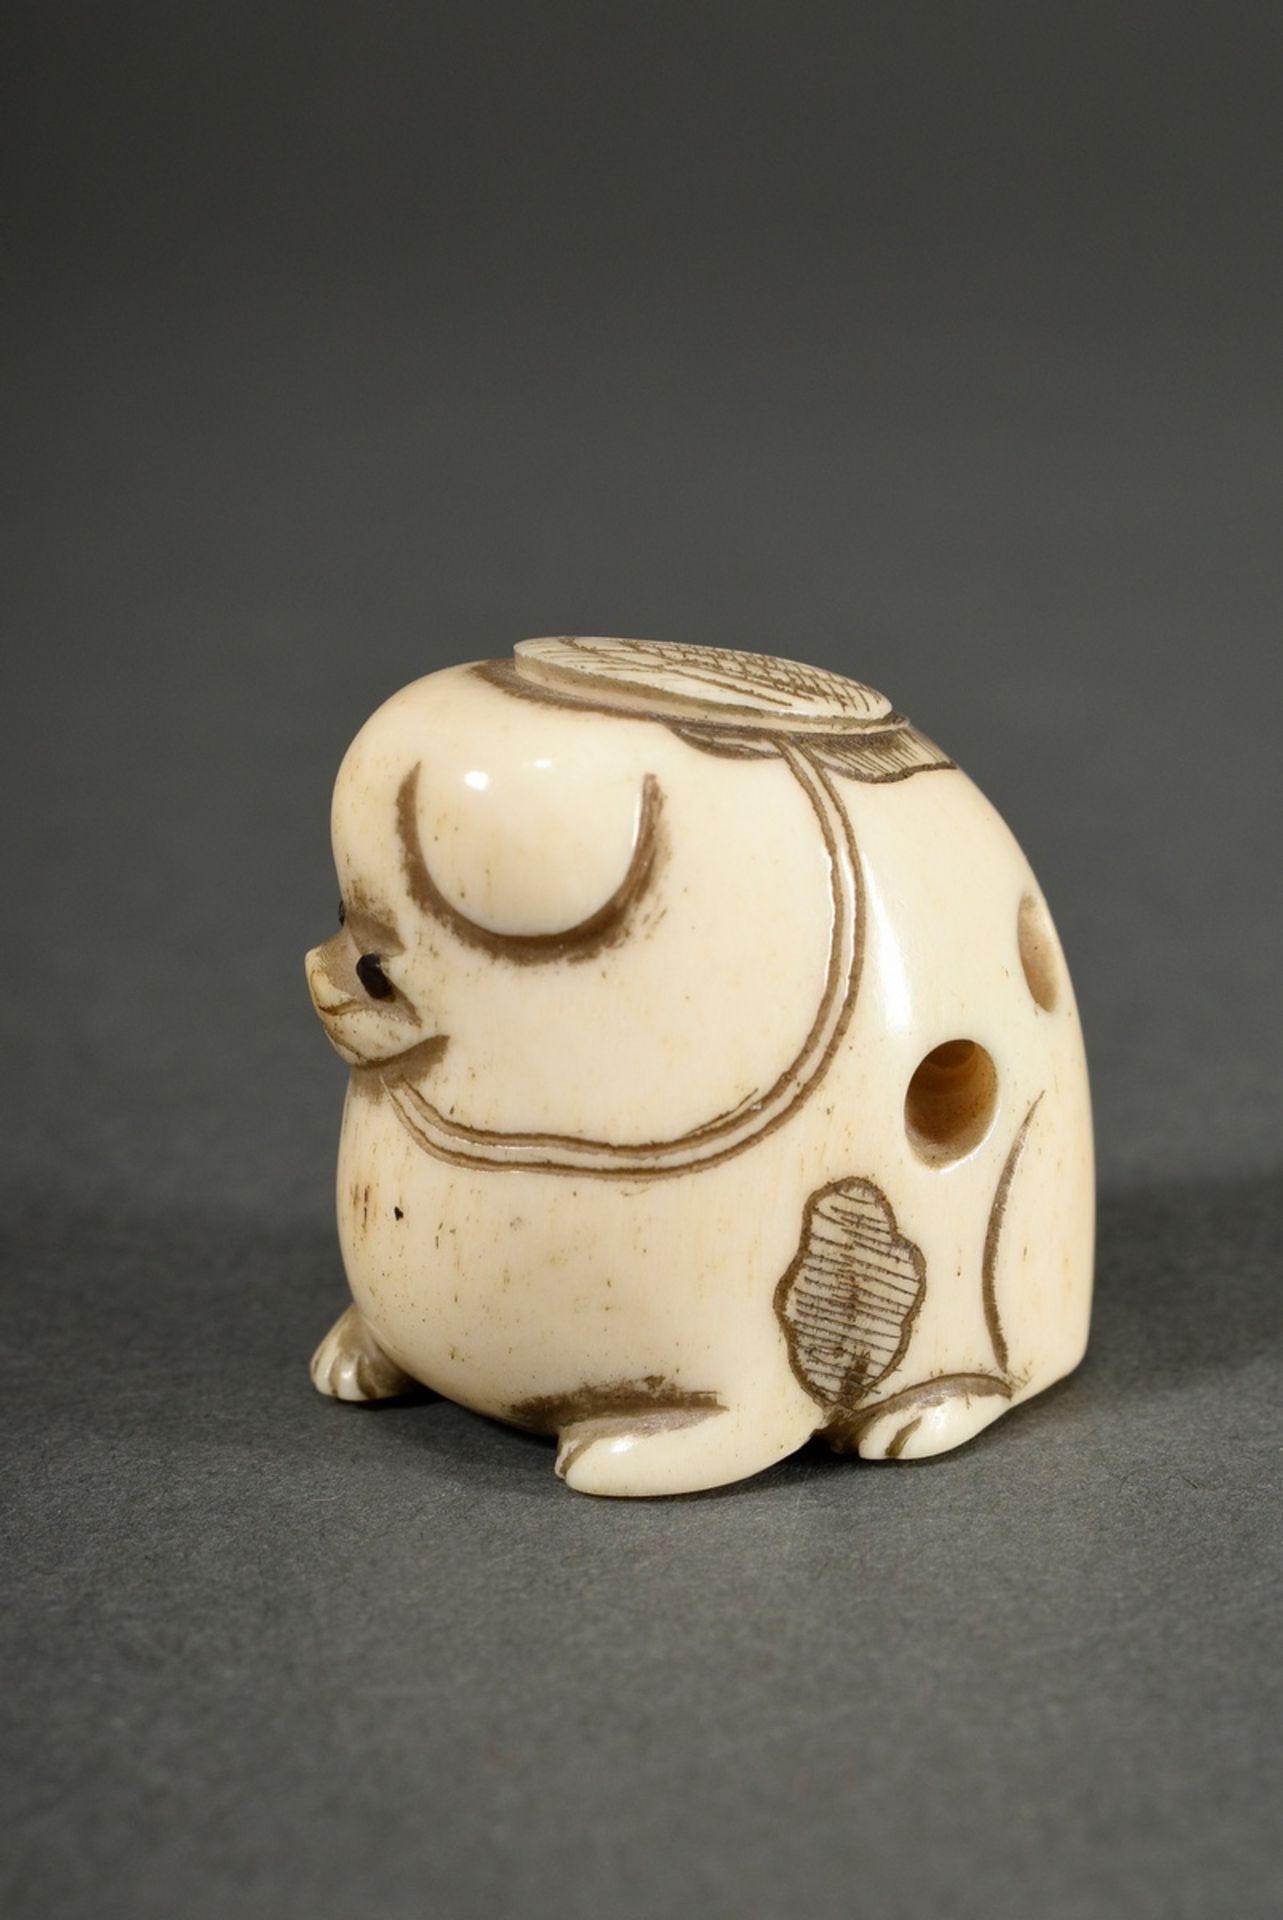 Stag horn netsuke "Sitting puppy" with inlaid horn eyes, Japan, h. 3.1cm - Image 3 of 5